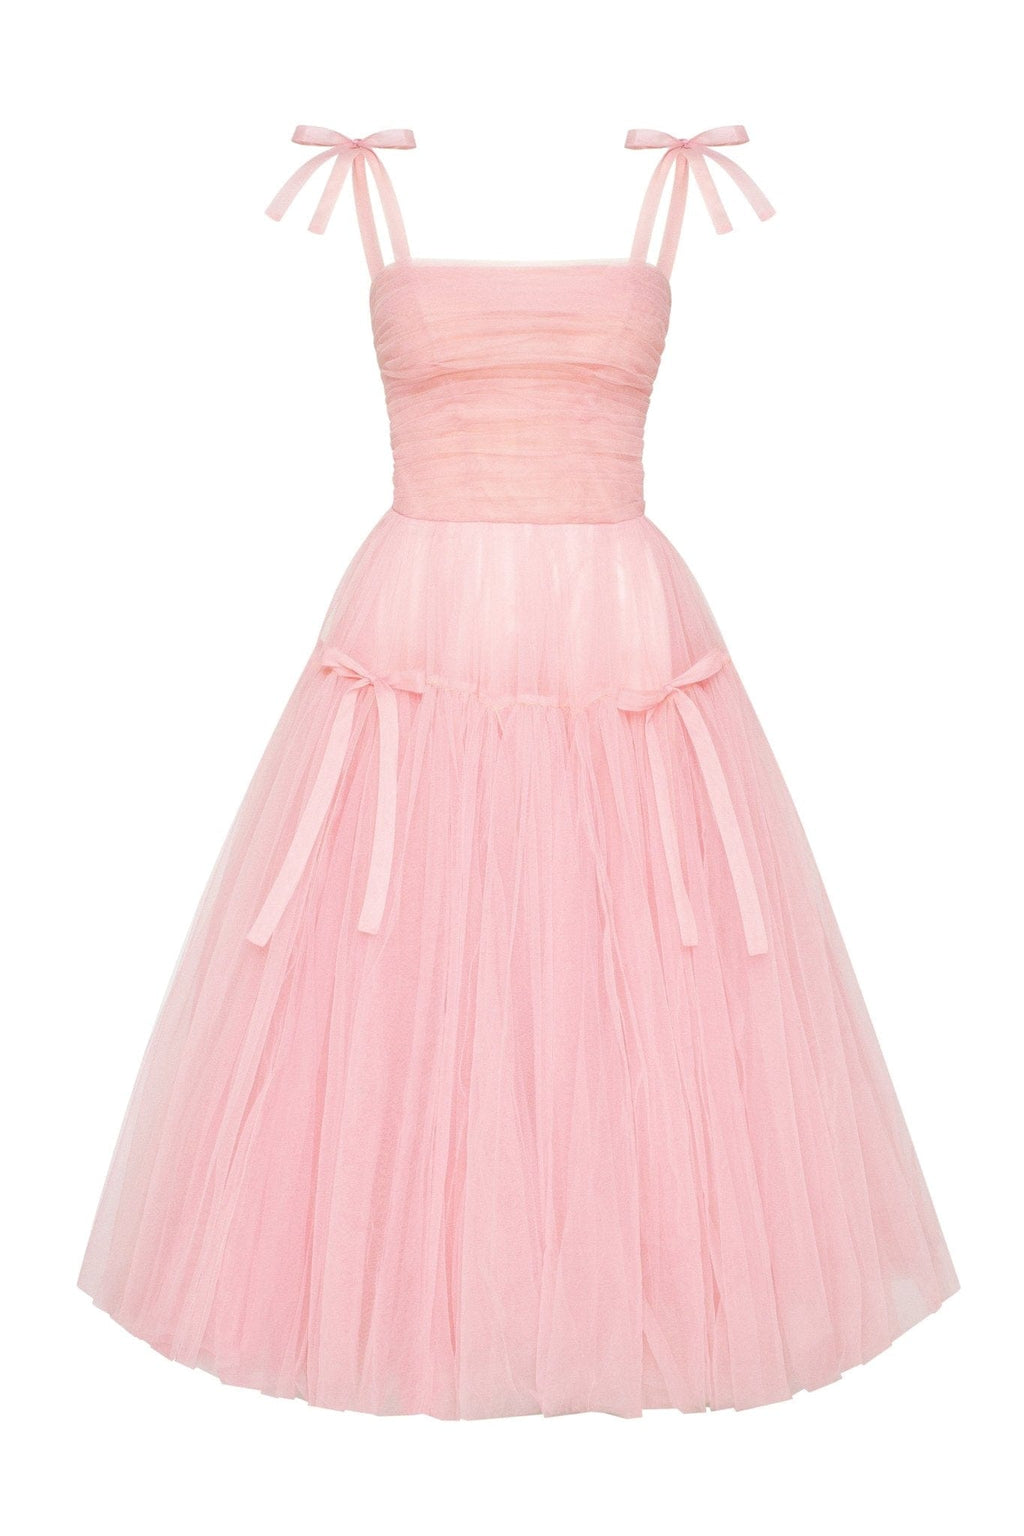 Misty Rose - ➤➤ Milla Ruffled Dress USA, Worldwide Dresses Tulle delivery Midi